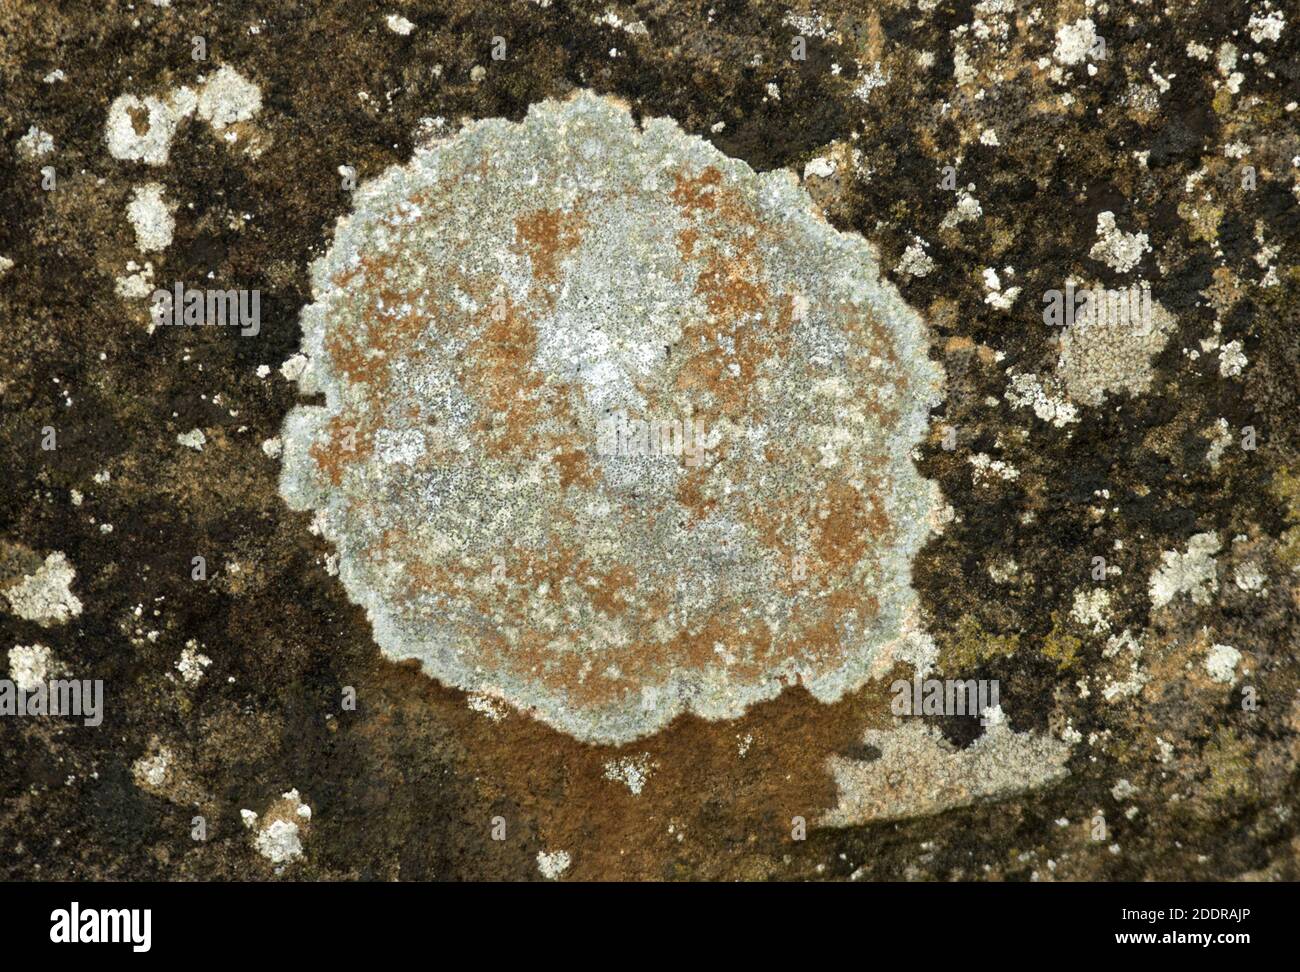 This species of Caloplaca lichen is the only one of the family to have orange ascocarps (spore bodies) whilst the encrusting grey thallus. Stock Photo